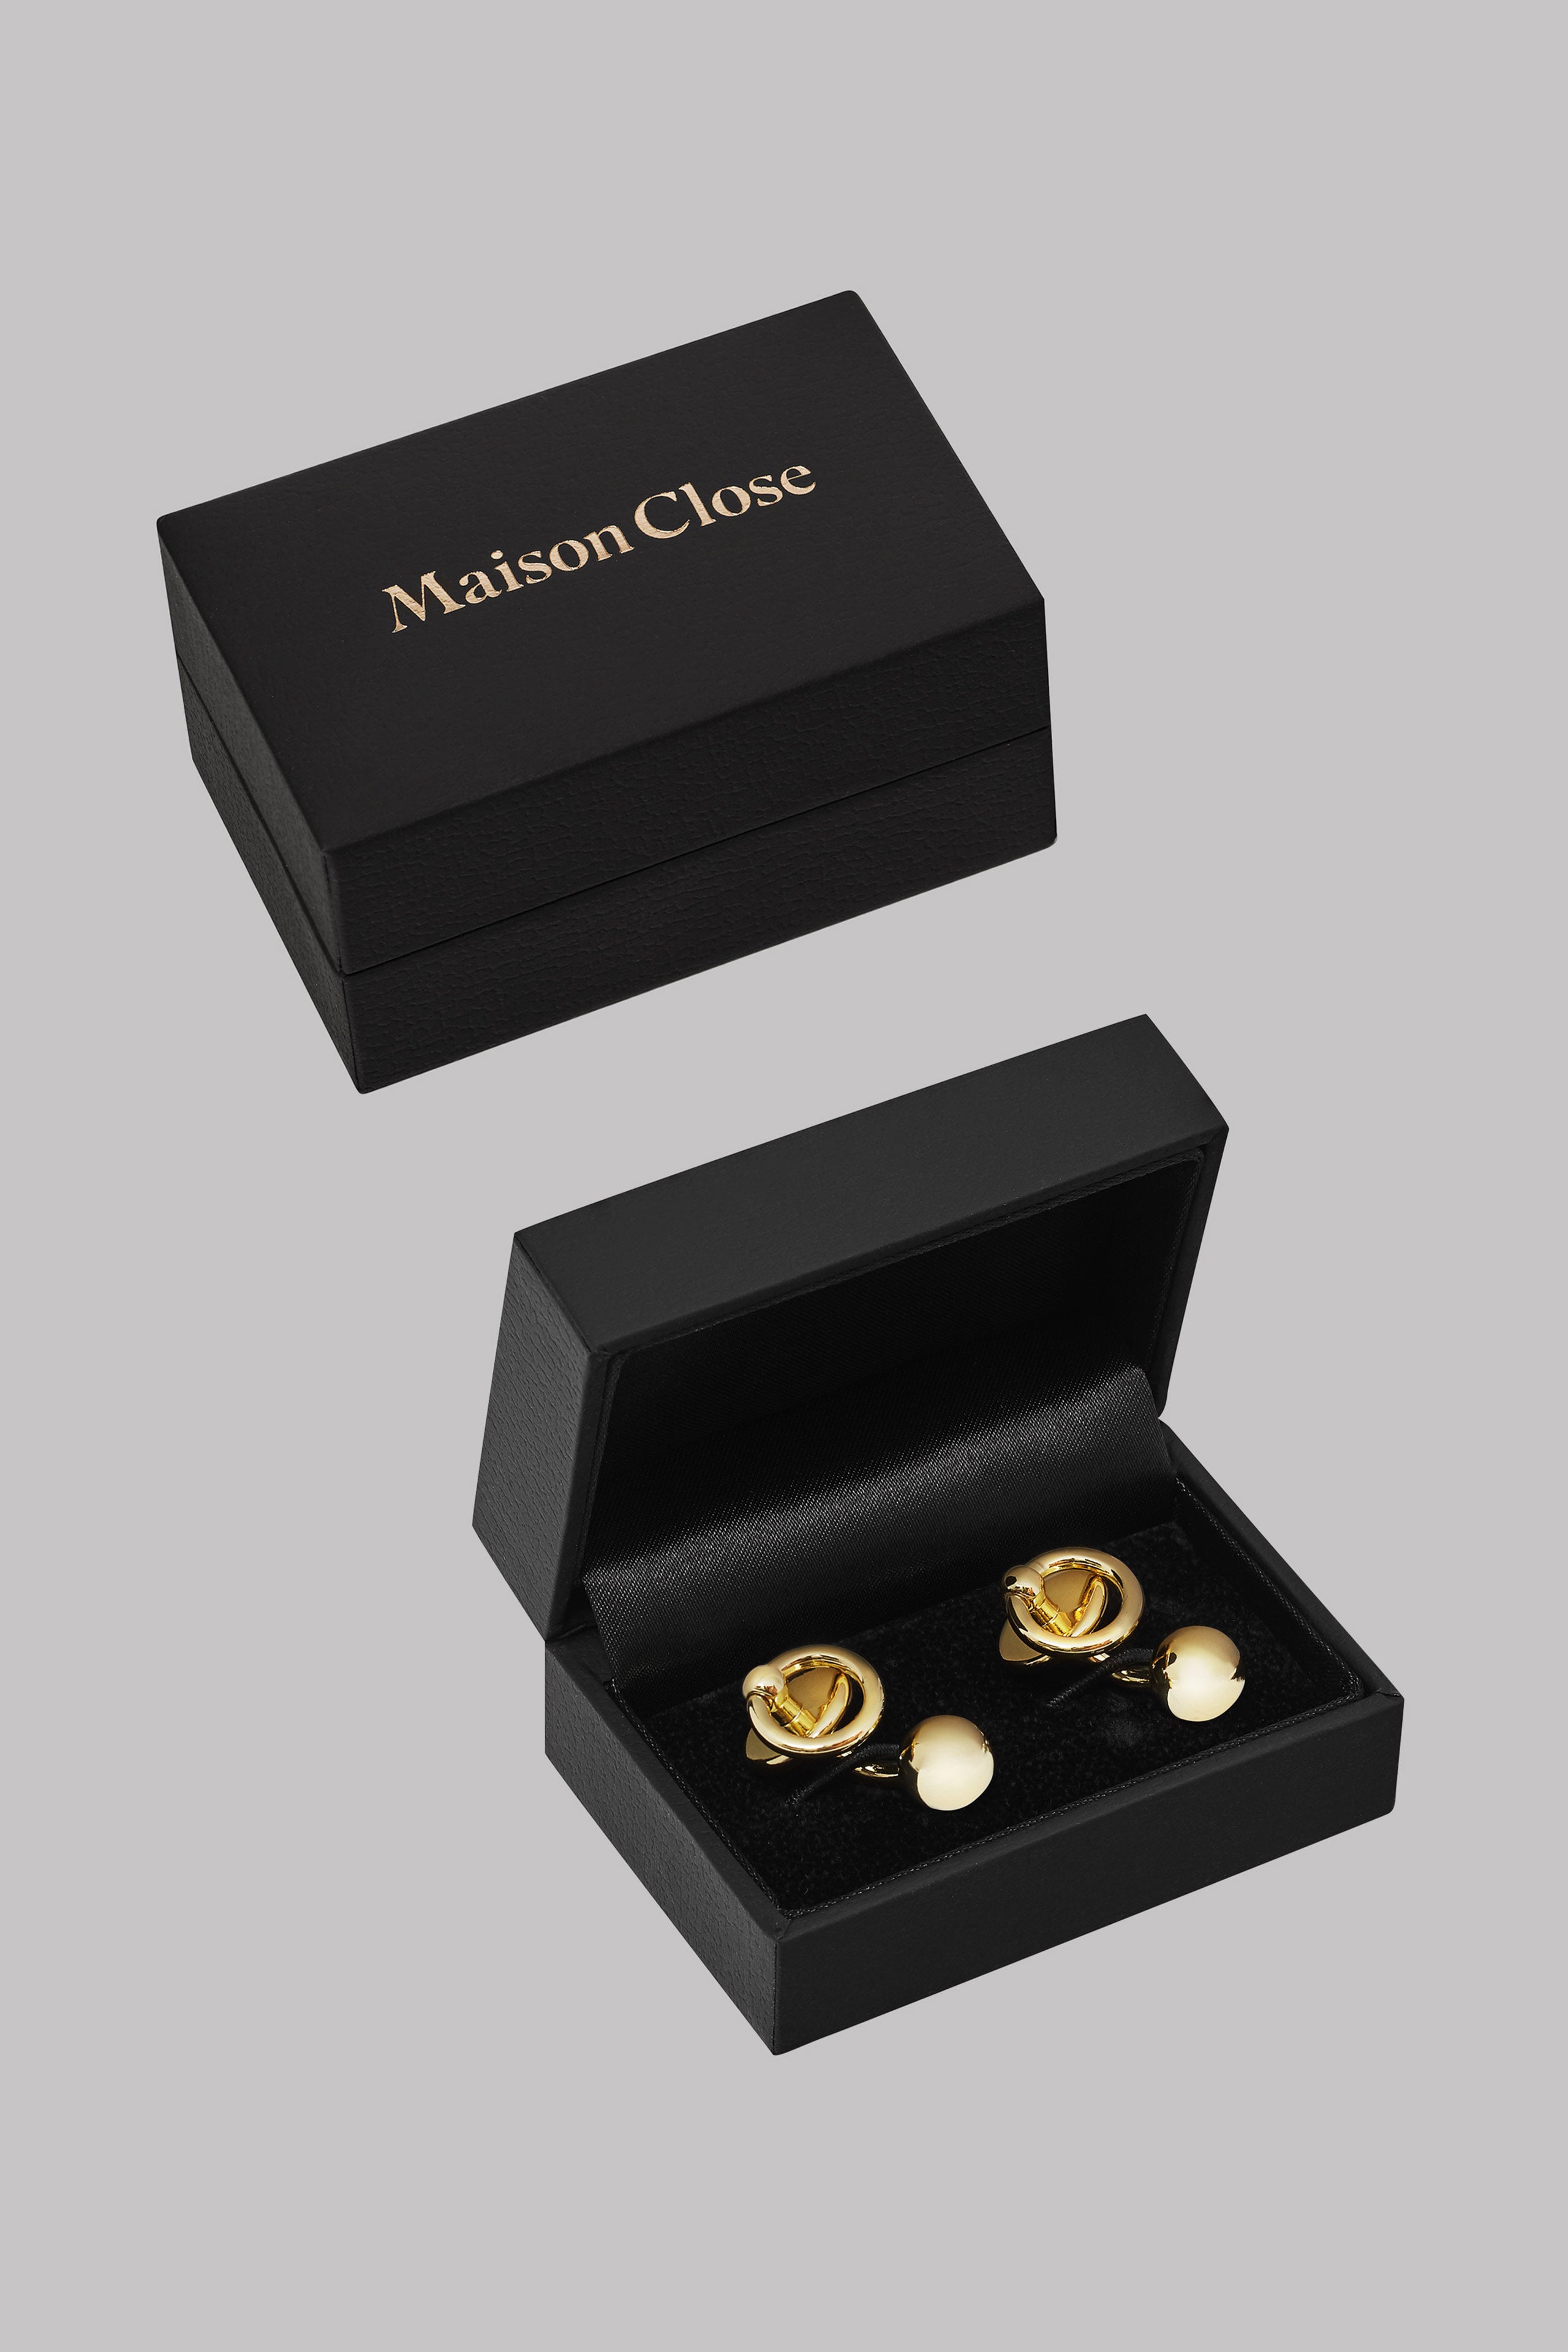 Products – CuffLink'd